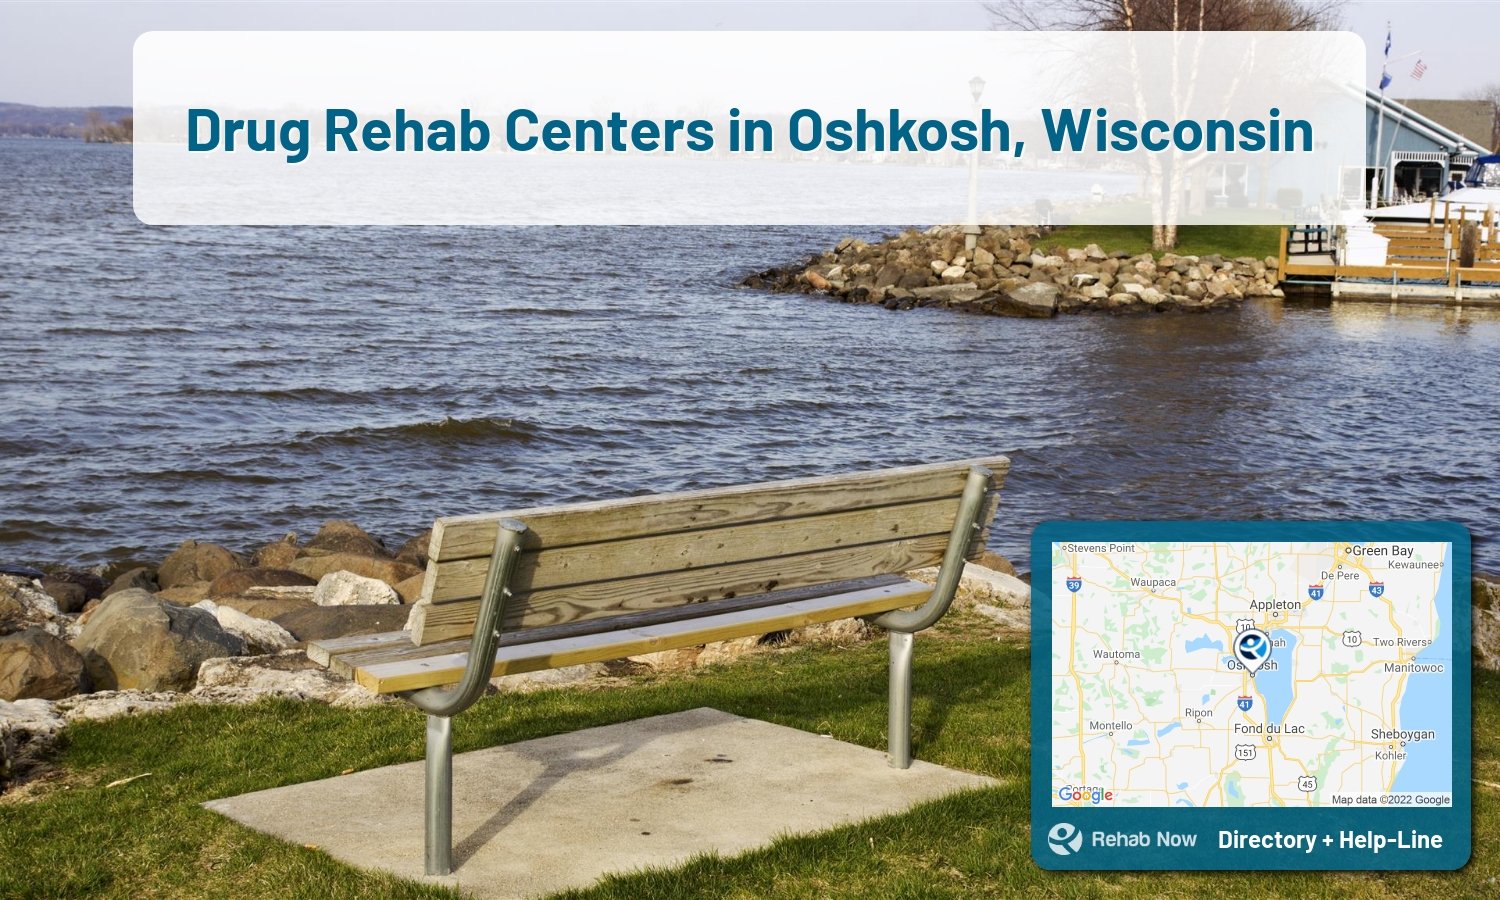 Oshkosh, WI Treatment Centers. Find drug rehab in Oshkosh, Wisconsin, or detox and treatment programs. Get the right help now!